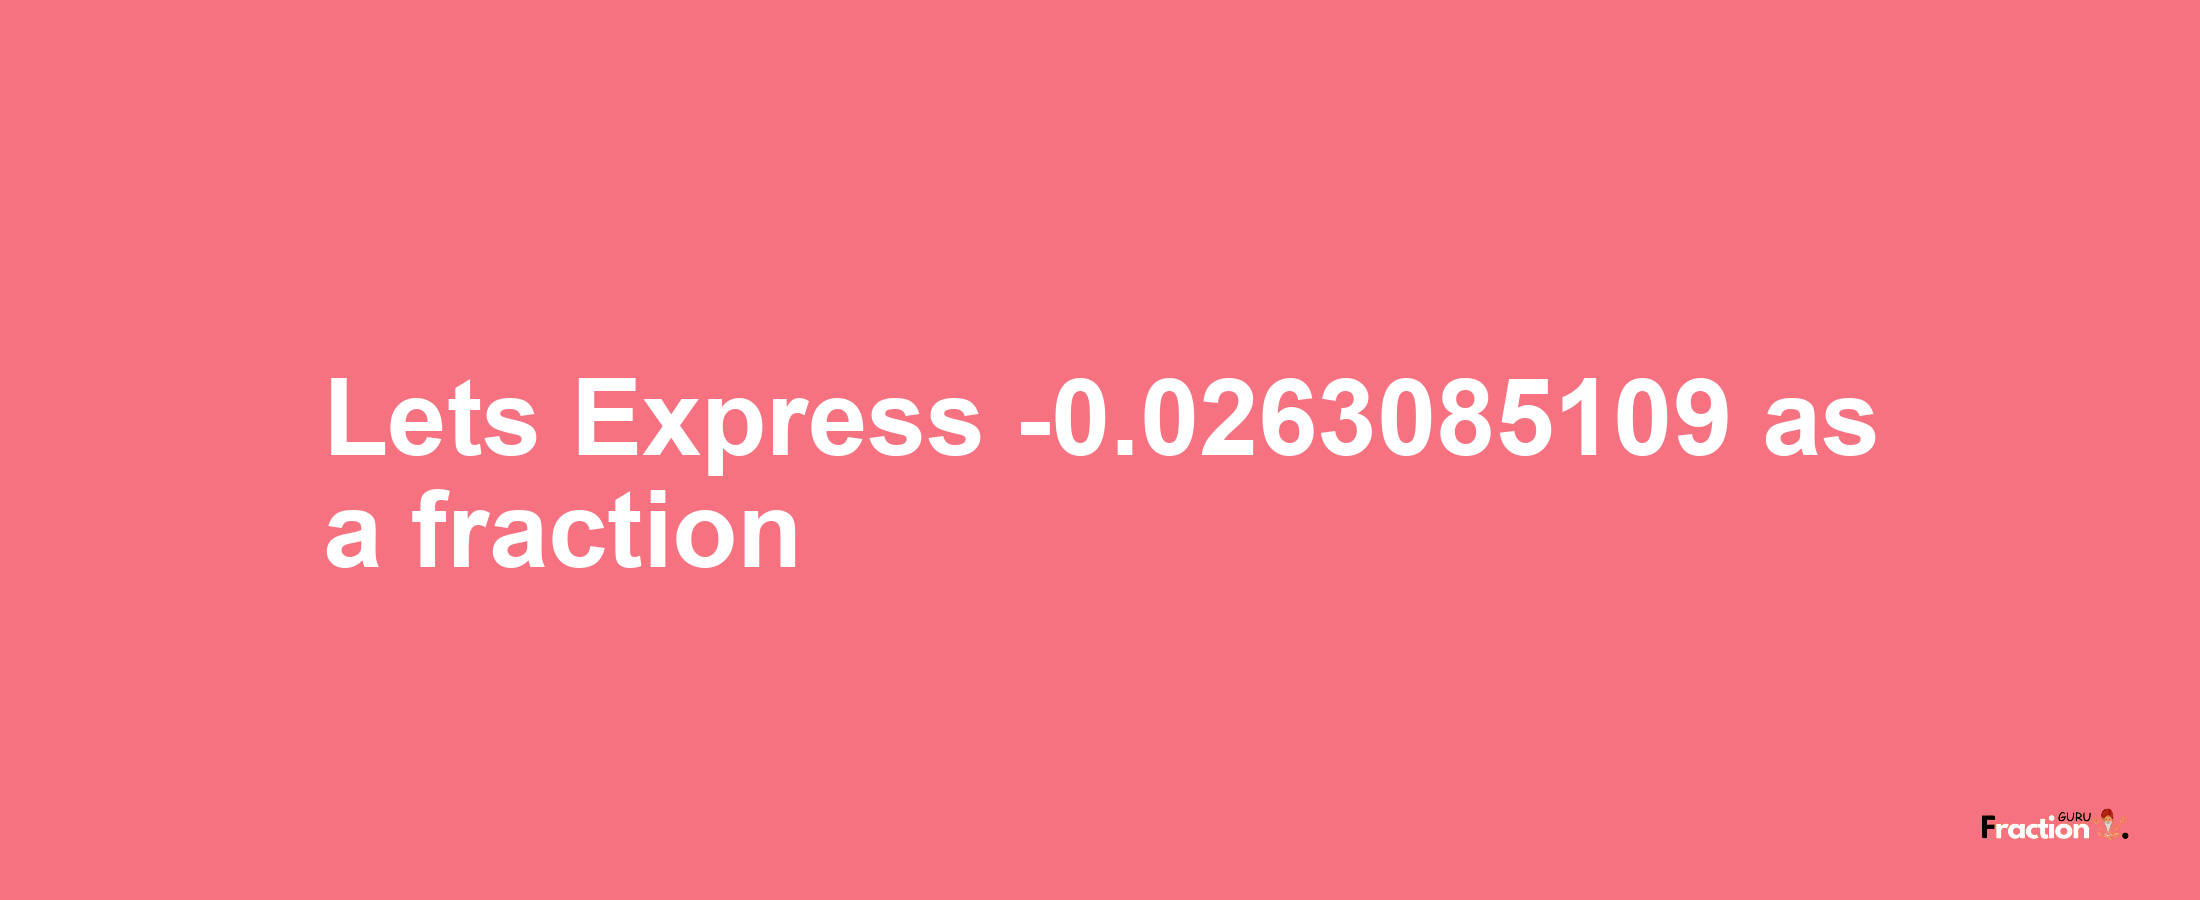 Lets Express -0.0263085109 as afraction